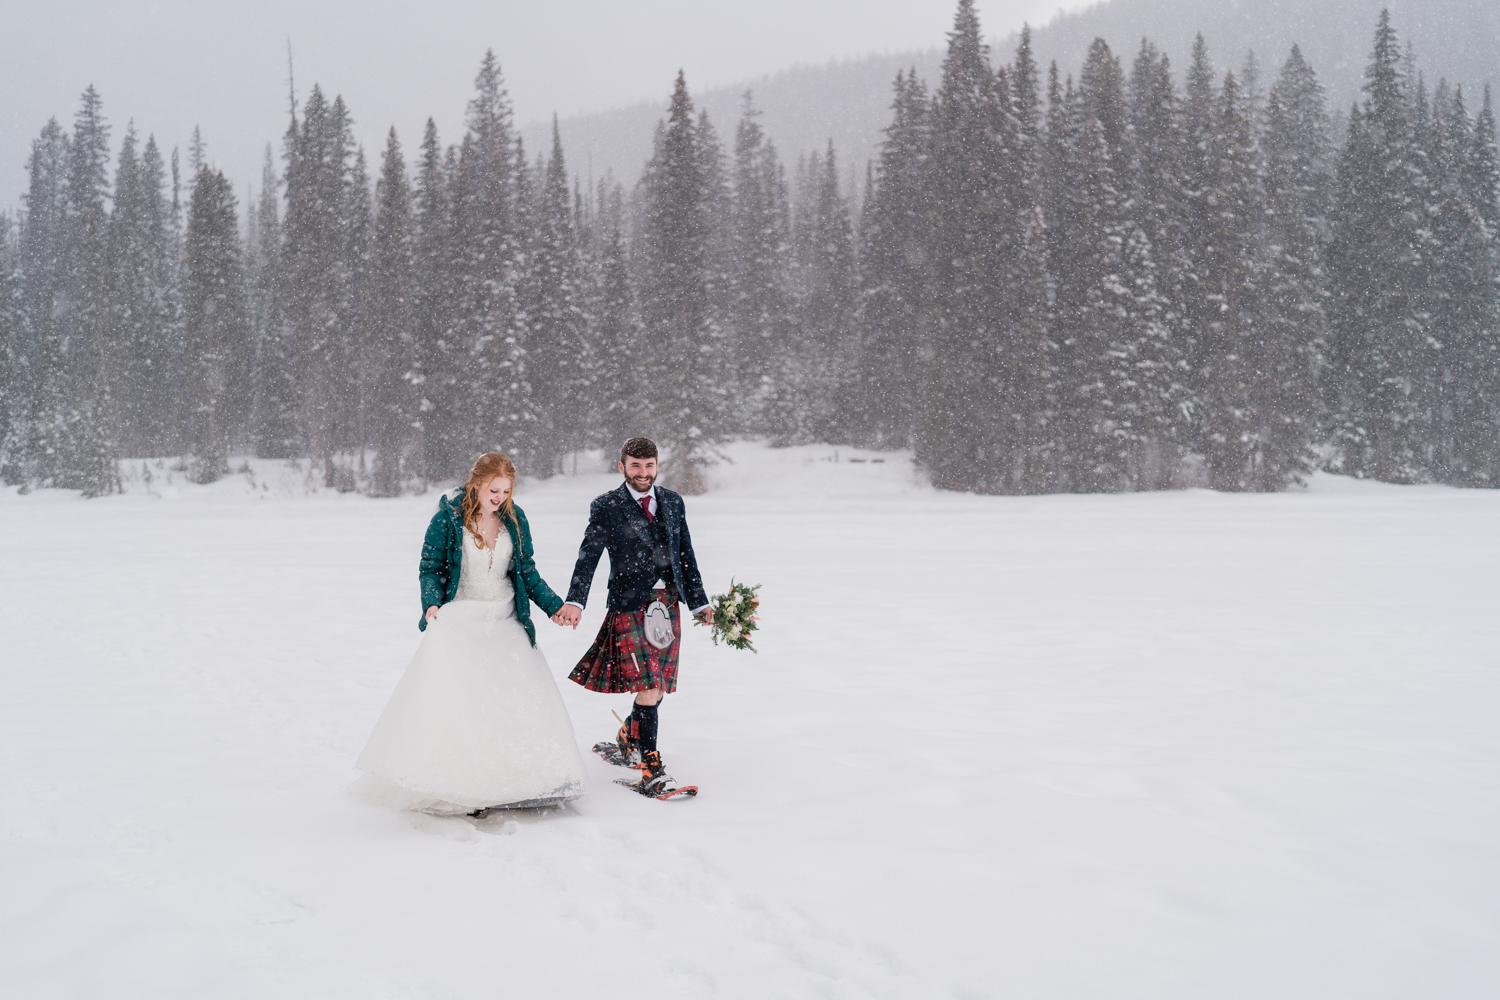 A red headed bride in a green puffy jacket snowshoes with groom in a kilt in a snowstorm during Emerald Lake elopement